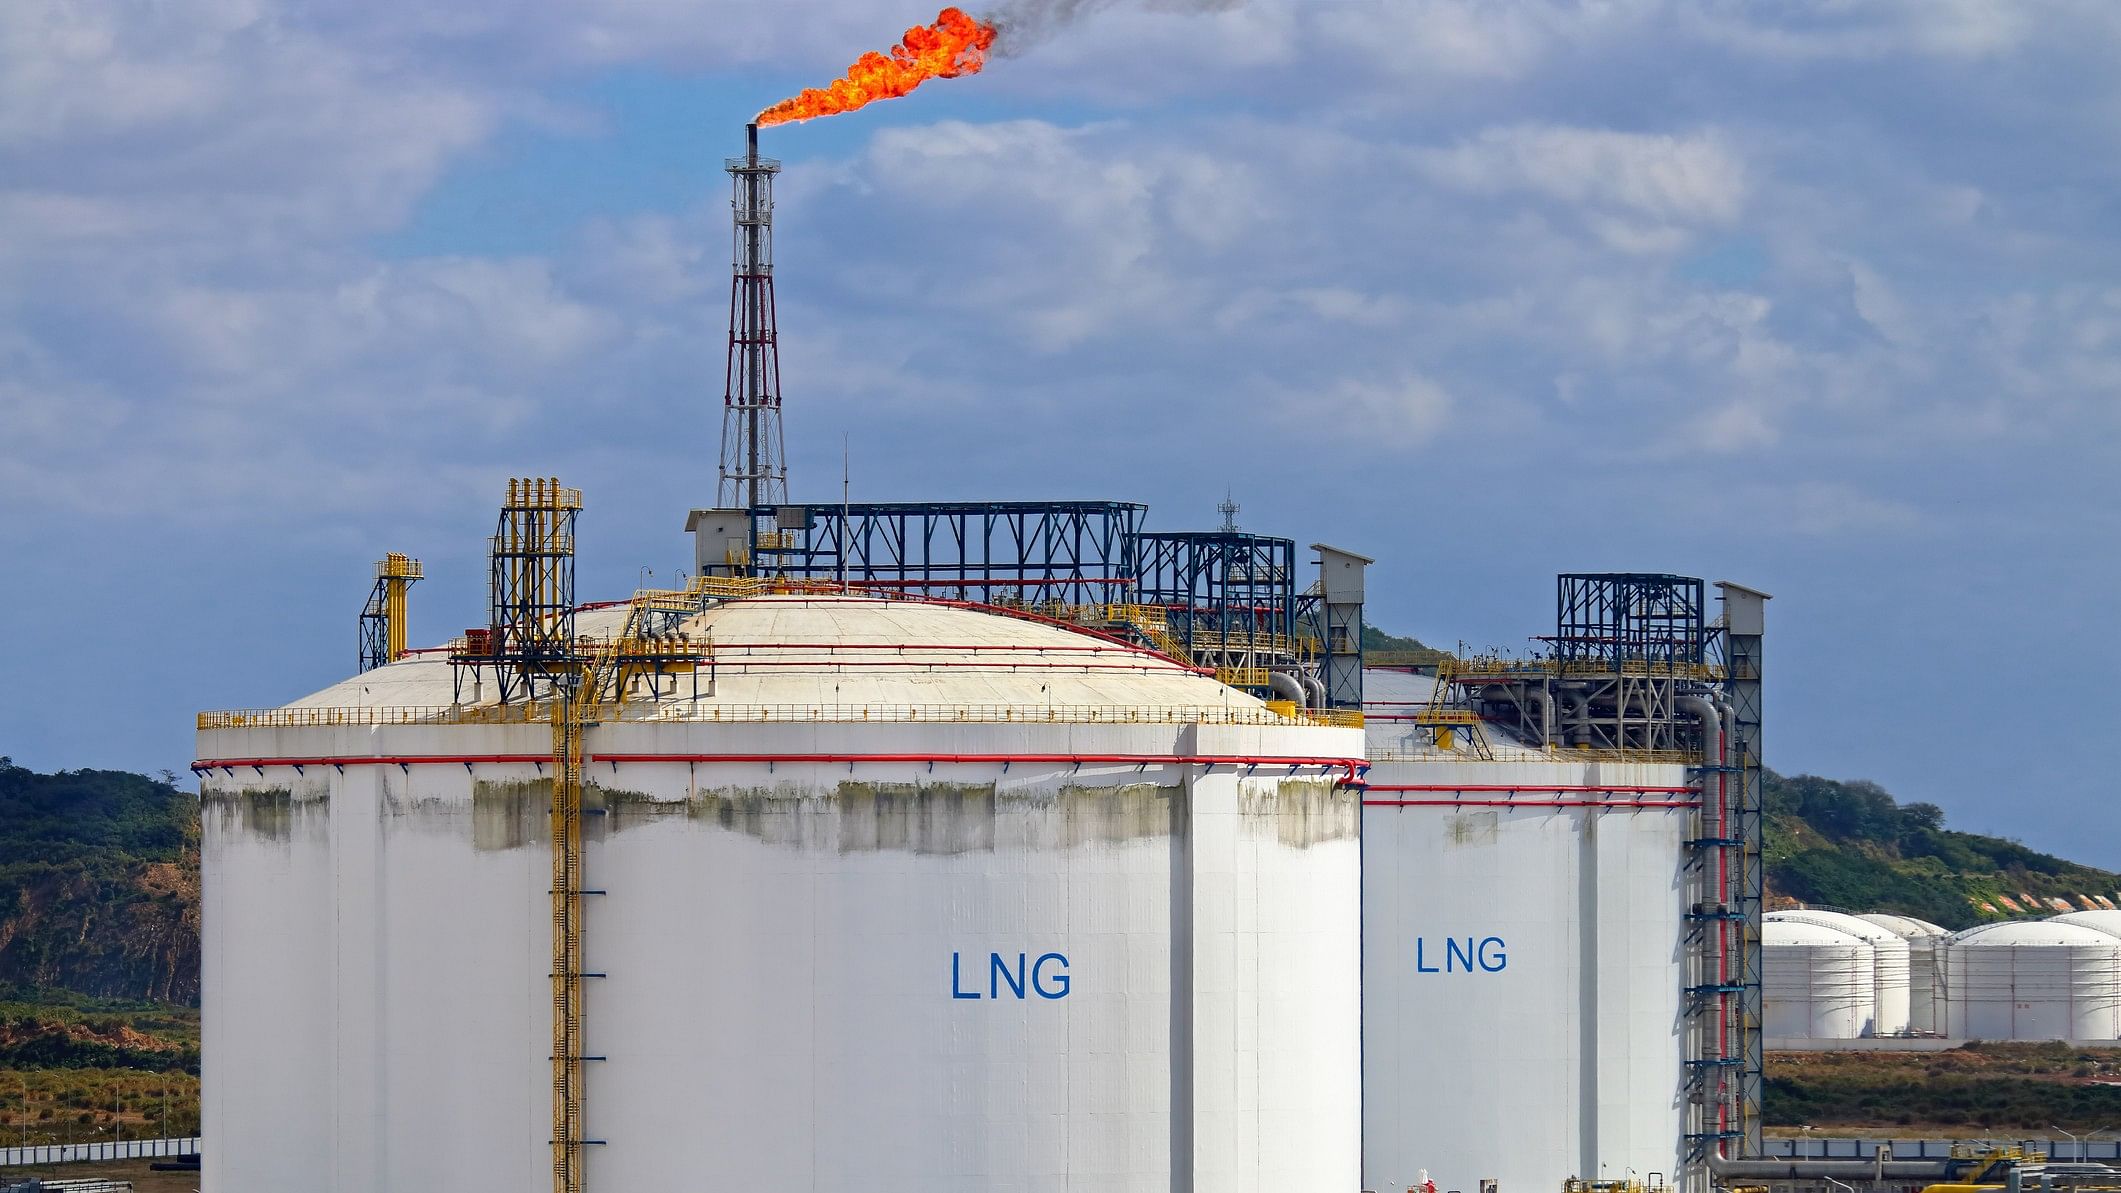 <div class="paragraphs"><p>Representative image of&nbsp;large LNG (Liquefied natural gas) tanks at LNG regasification terminal, with gas flare stack</p></div>